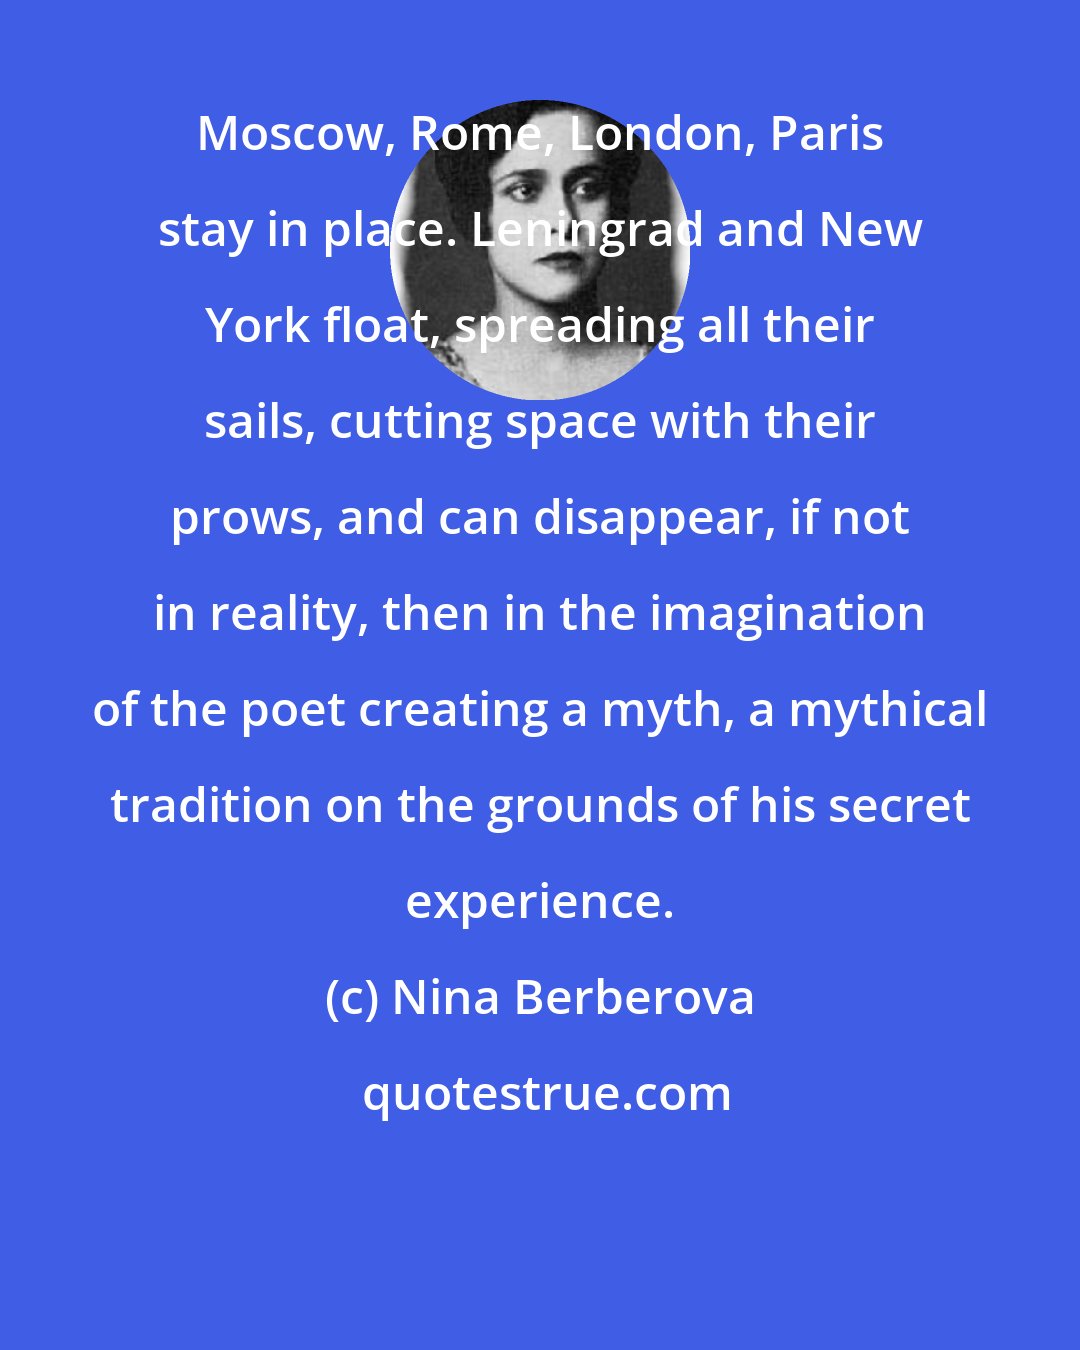 Nina Berberova: Moscow, Rome, London, Paris stay in place. Leningrad and New York float, spreading all their sails, cutting space with their prows, and can disappear, if not in reality, then in the imagination of the poet creating a myth, a mythical tradition on the grounds of his secret experience.